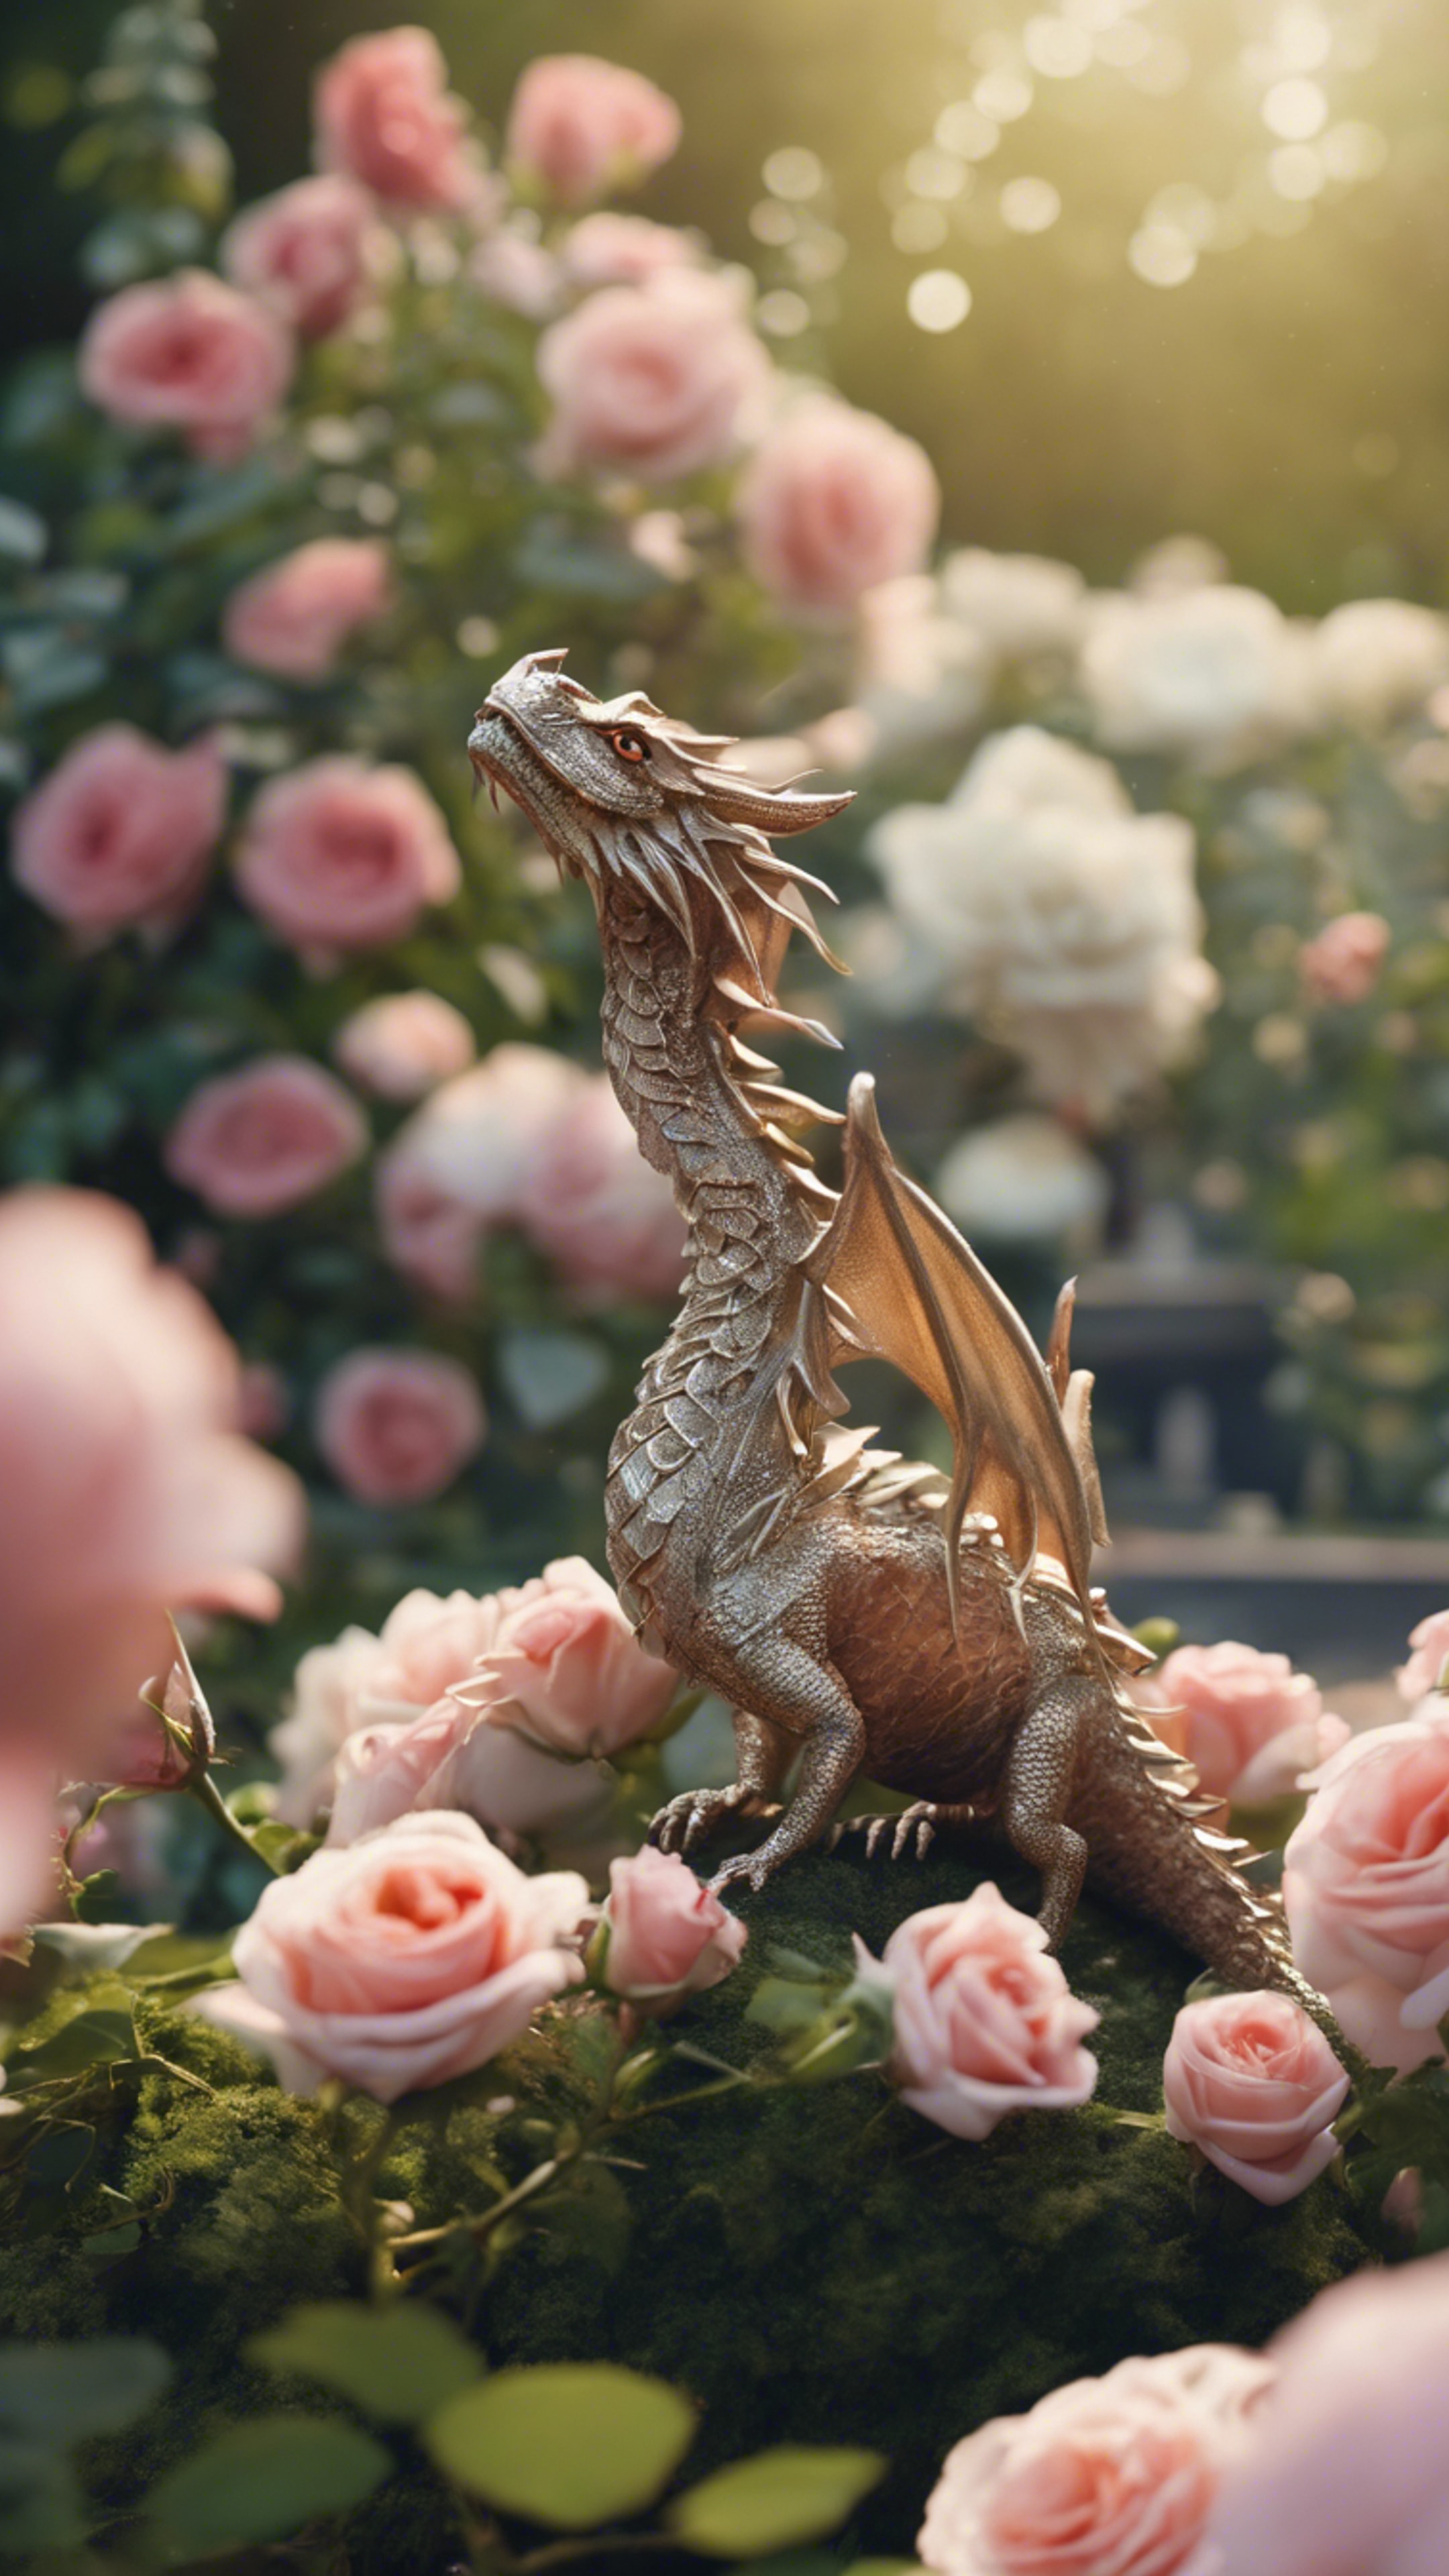 A peaceful garden scene with a tiny, delicate dragon hovering over blooming roses. Tapeta[938d180fa7284dedb4af]